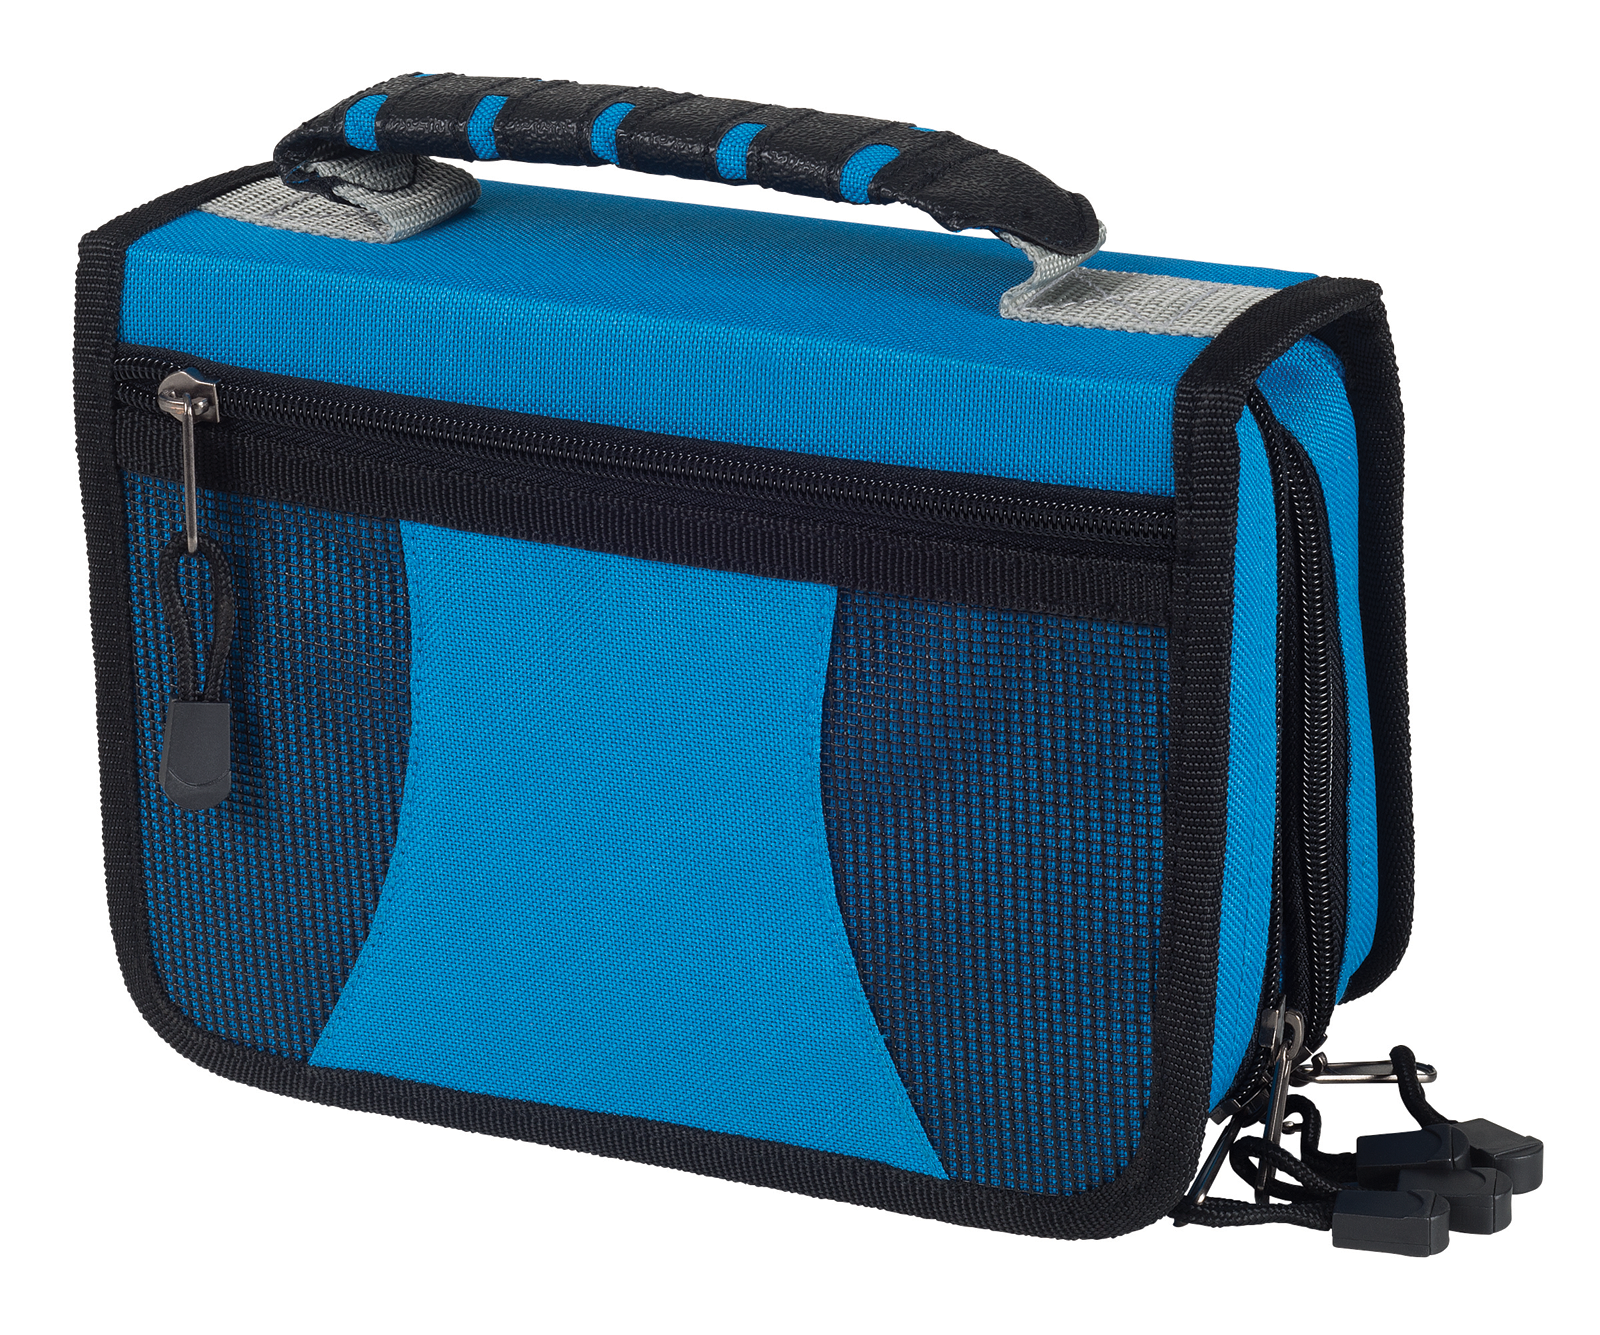 https://static.upnorthsports.com/Image/catimages/9745-Dual-Compartment-Tackle-Bag1-1600.png